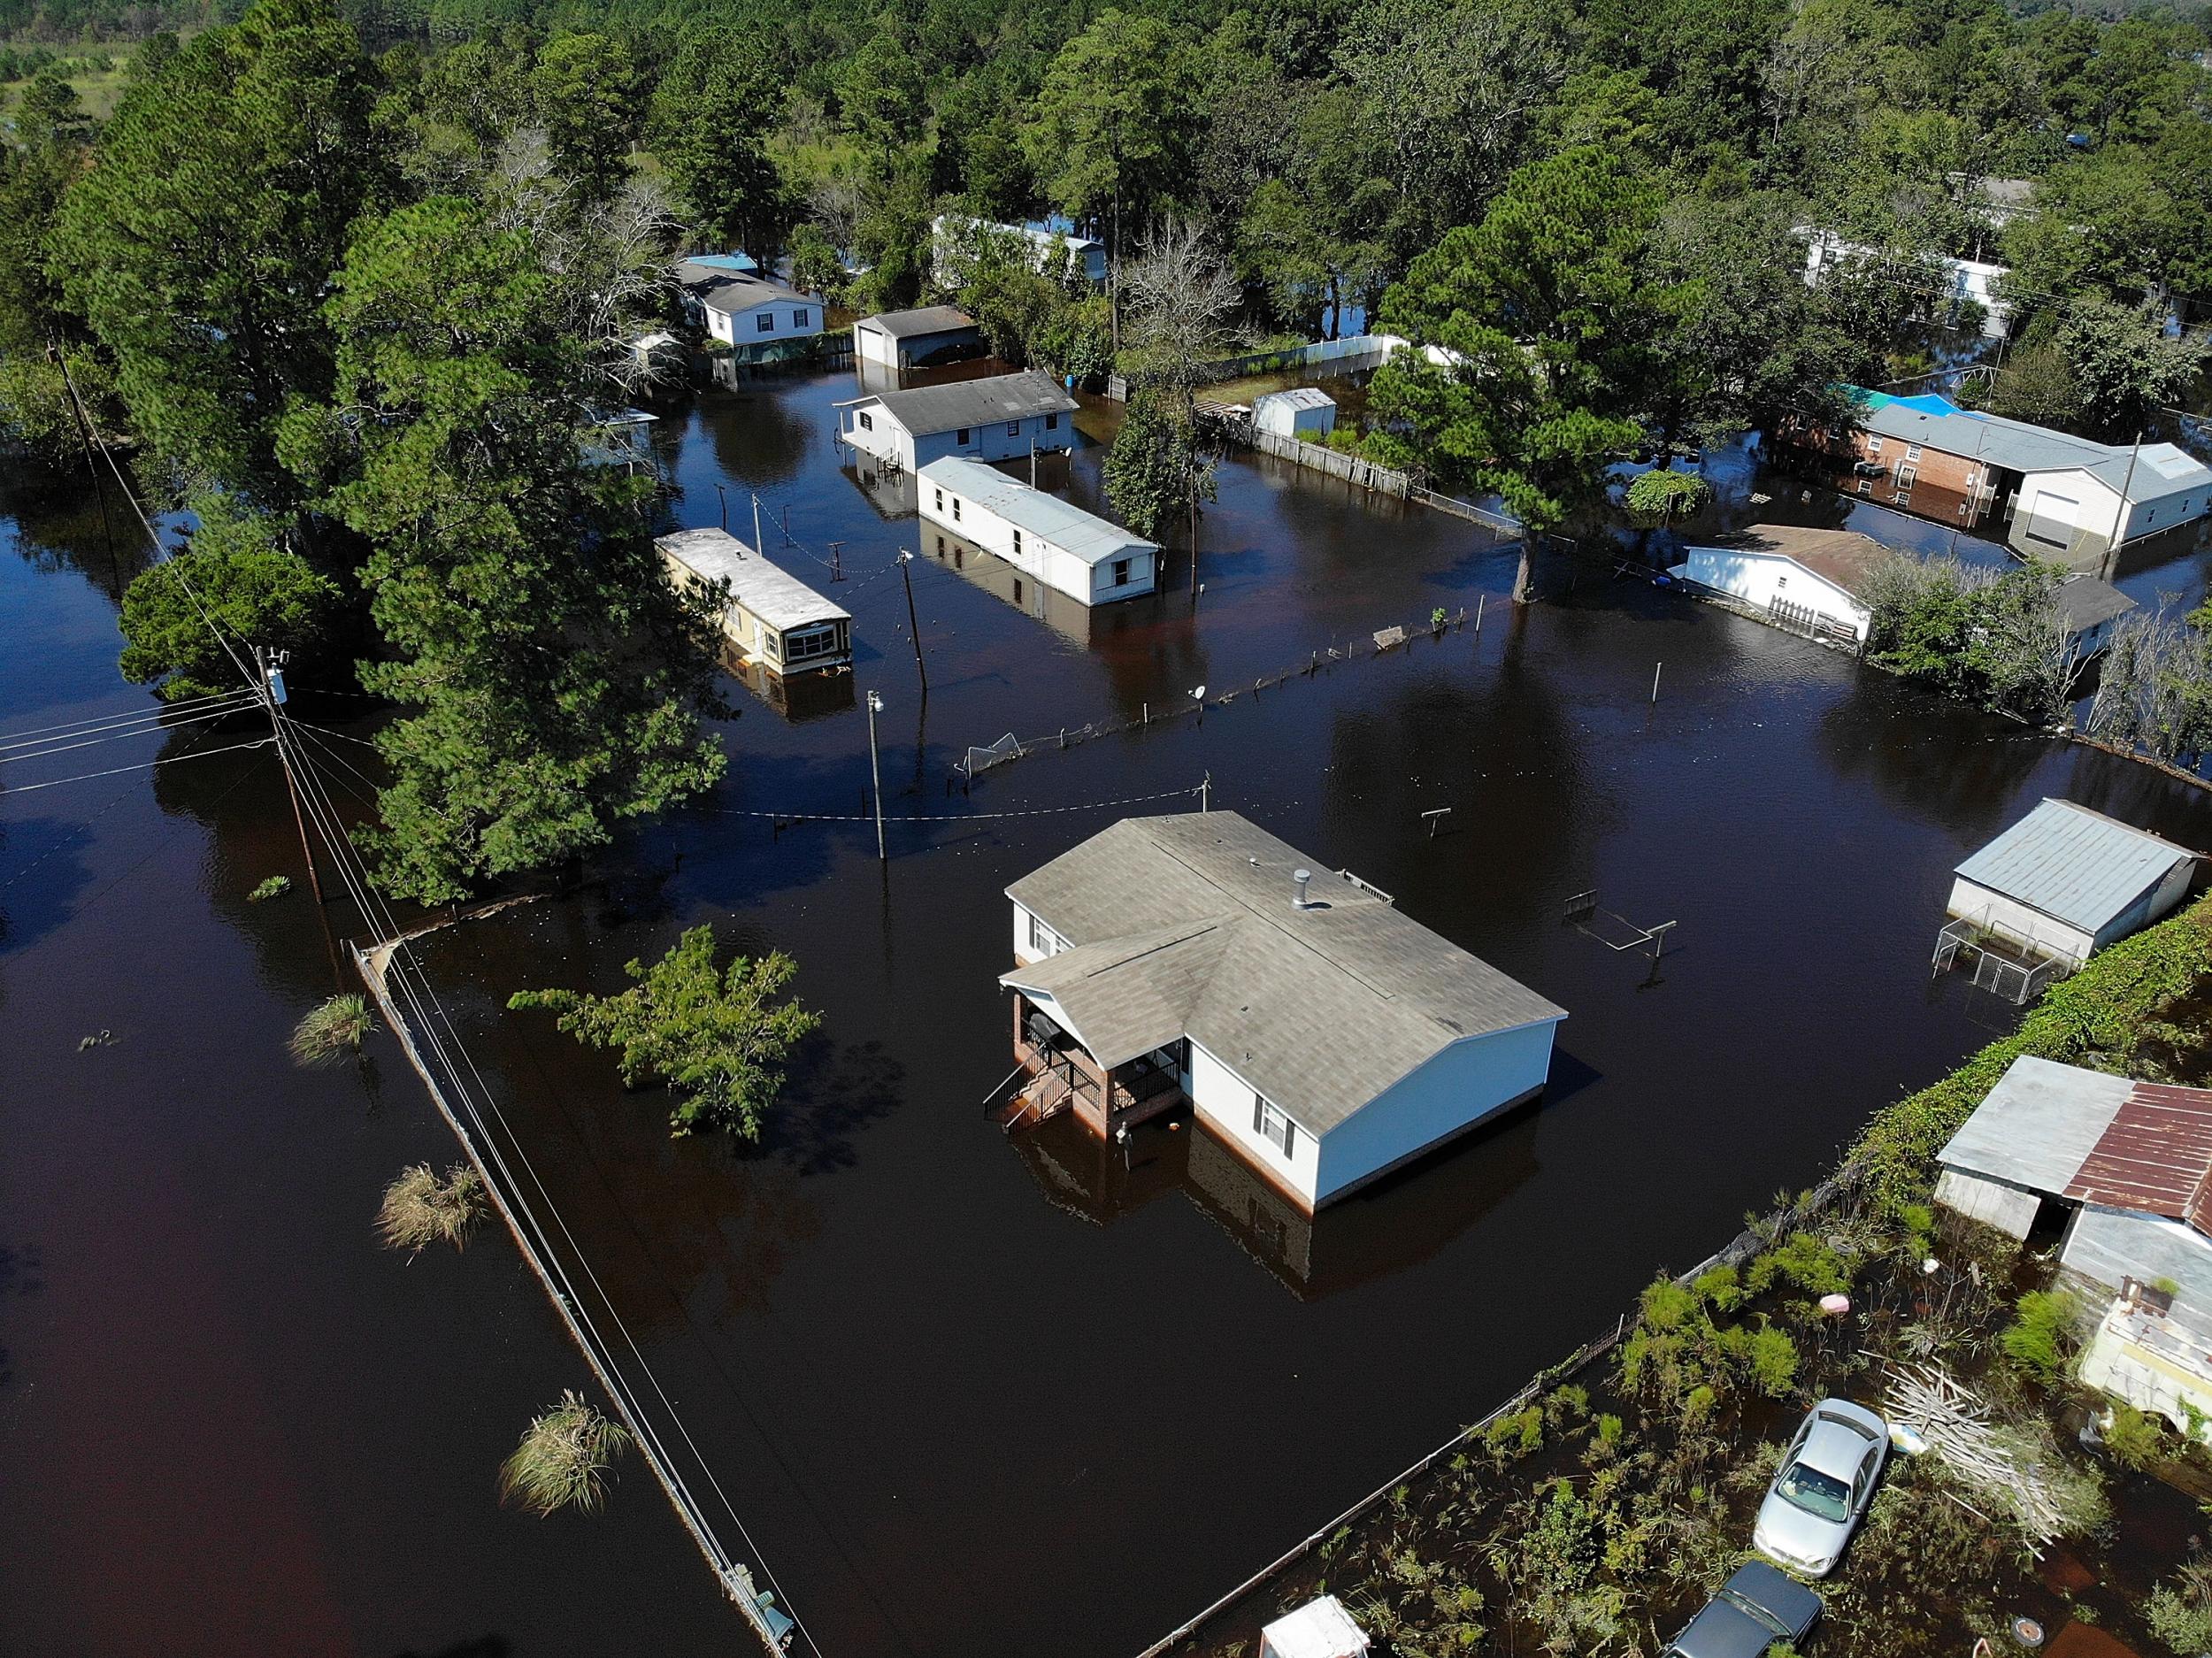 The van, carrying two women being transported to a mental health facility, was overtaken by flood waters as a result of Hurricane Florence